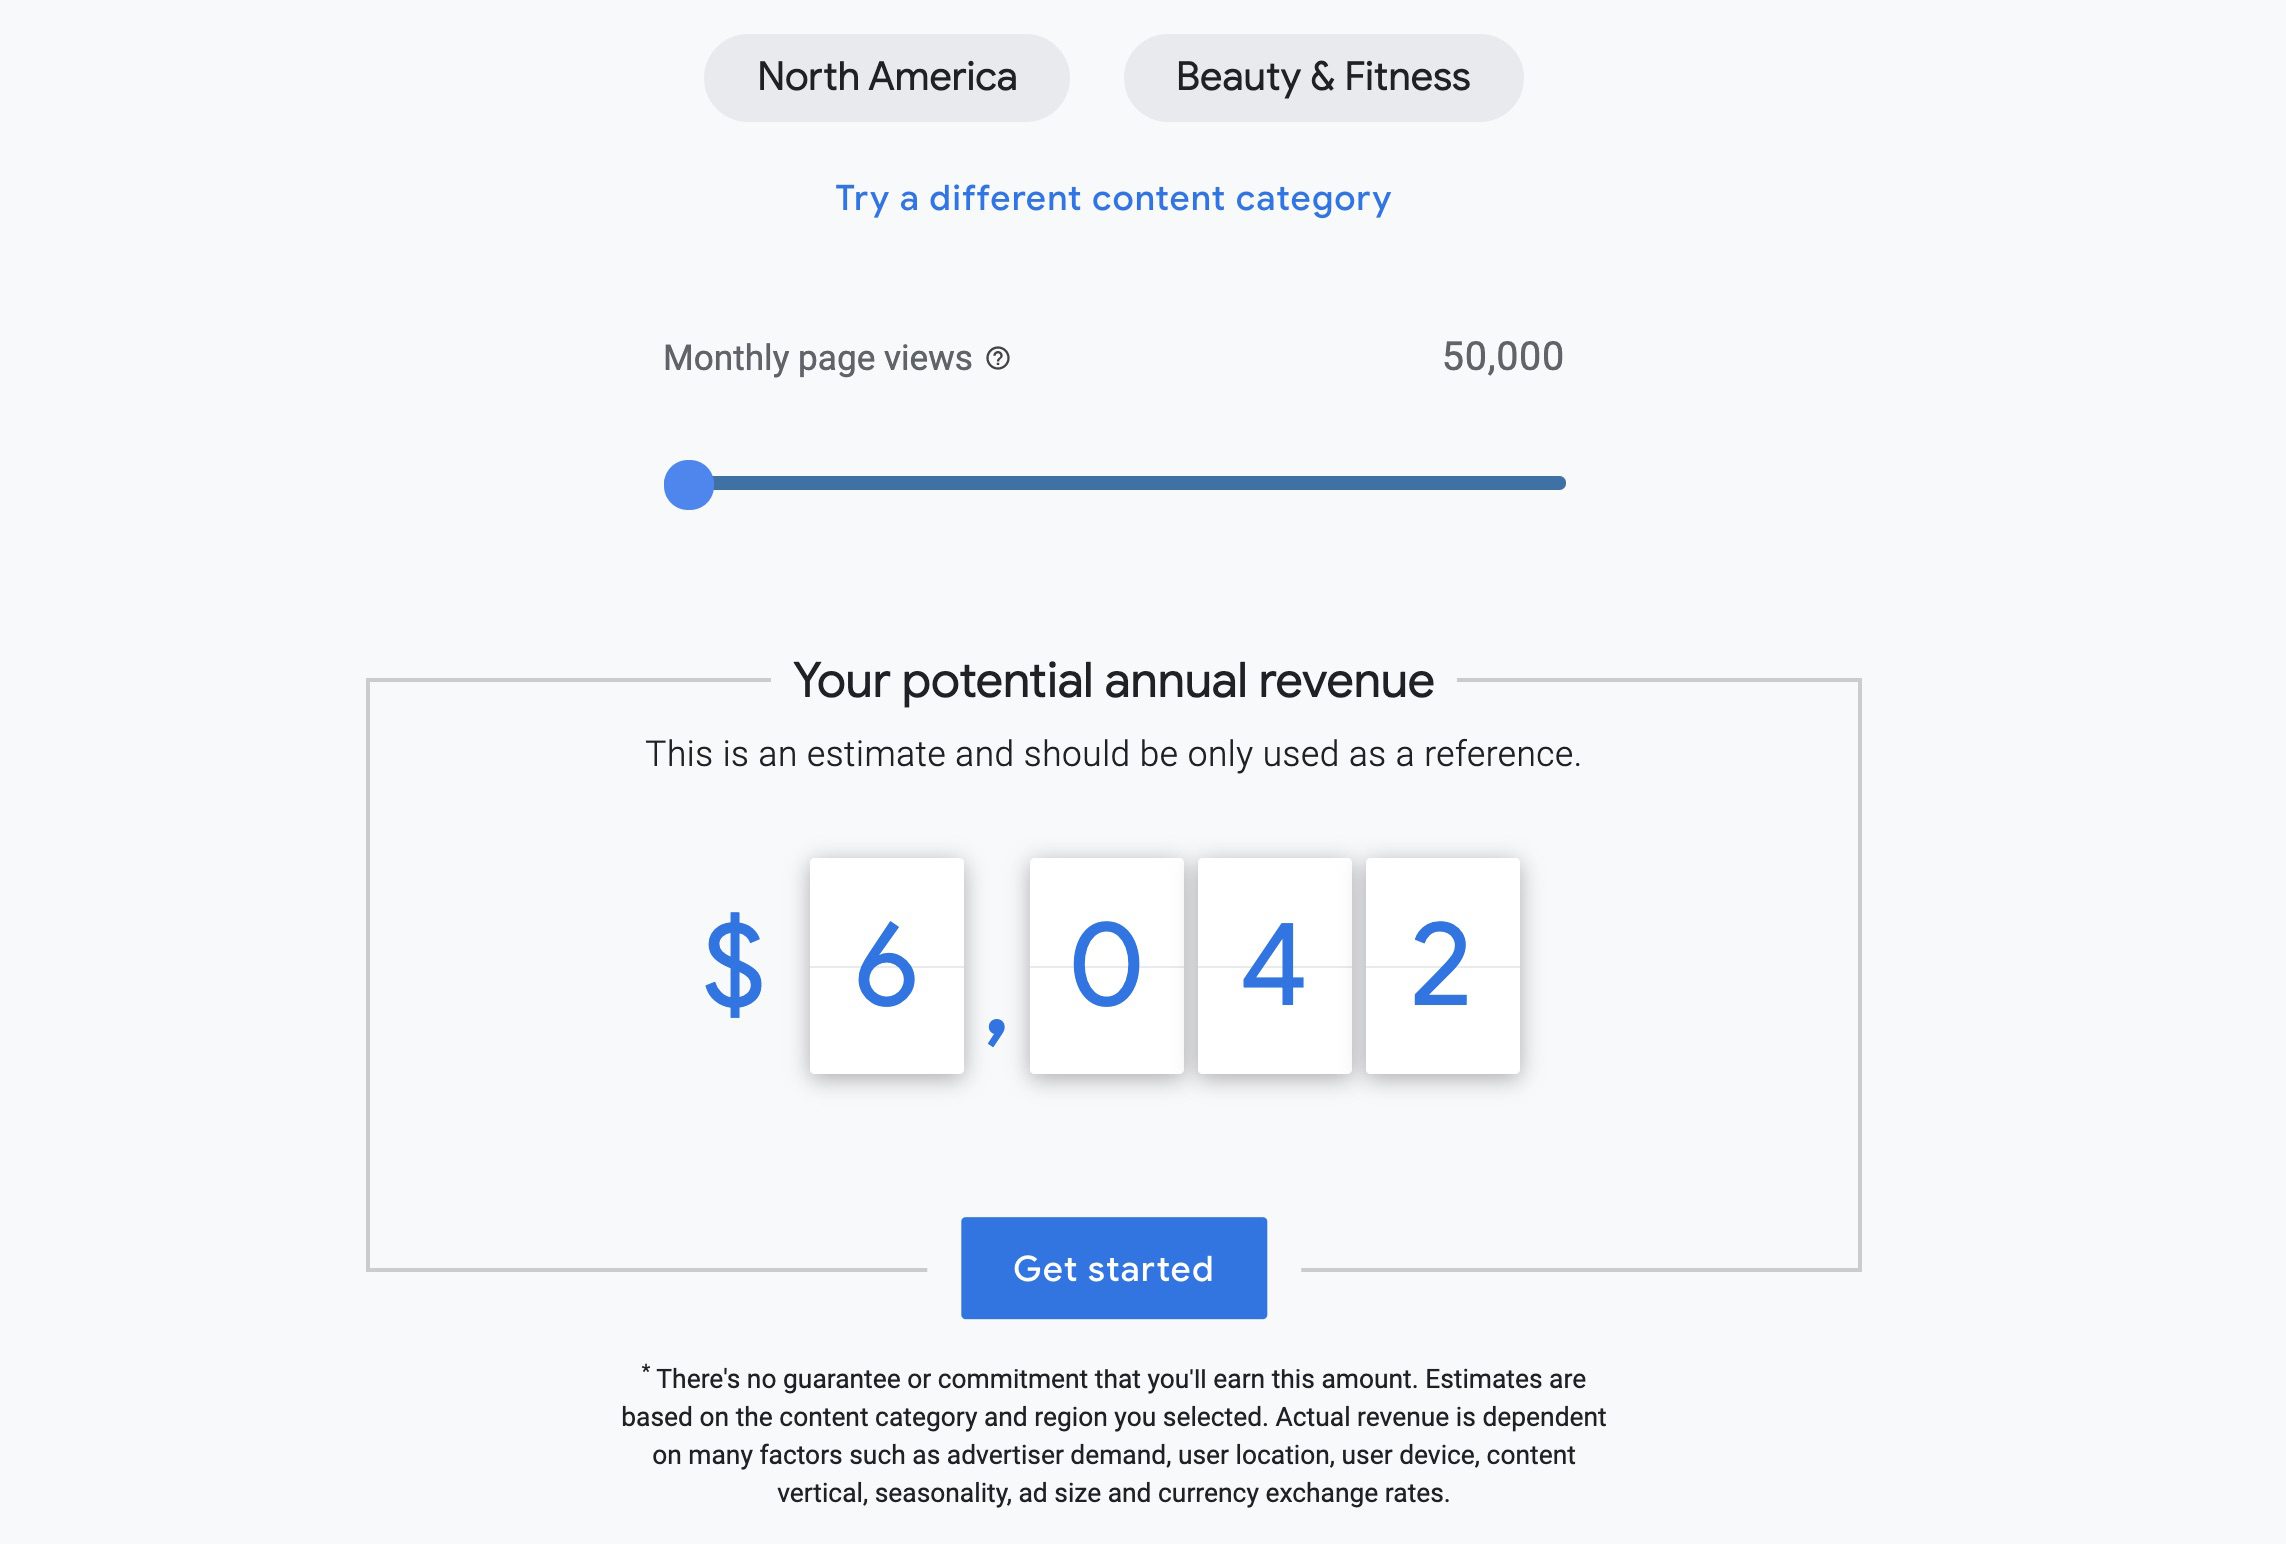 For the sake of this blog, I looked up how much a website in the beauty and fitness niche would make if they had 50,000-page visits per month. 